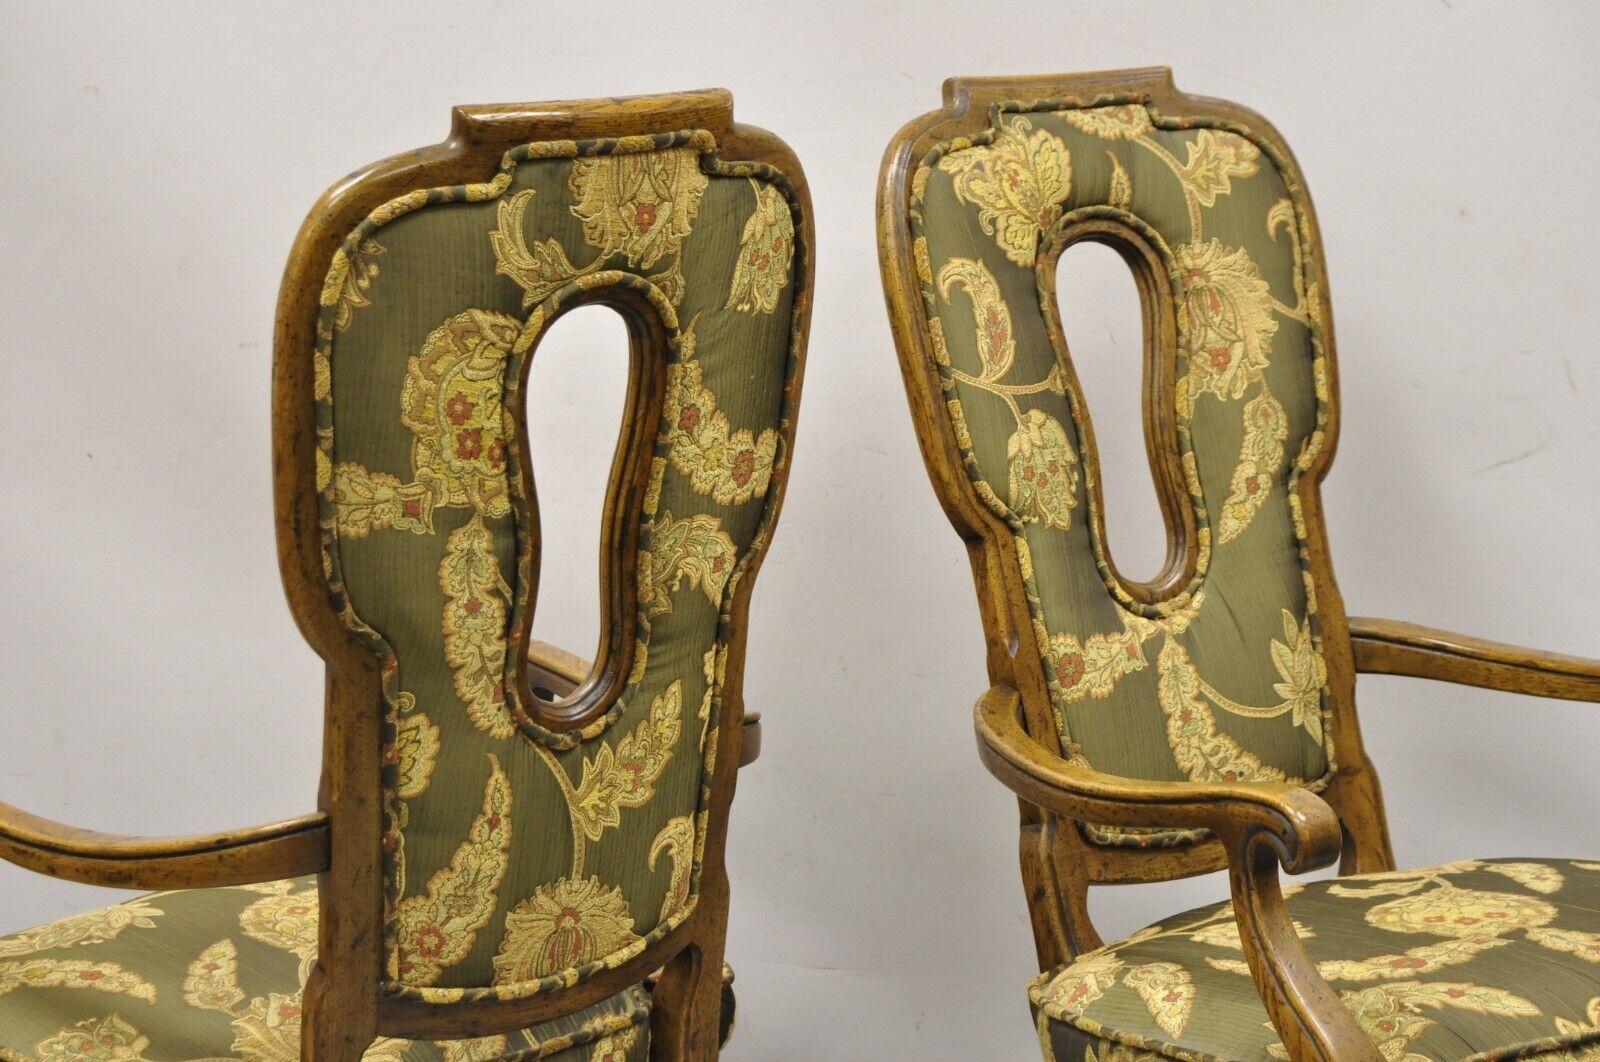 Vintage Hollywood Regency Keyhole Back Fireside Lounge Arm Chairs - a Pair For Sale 4